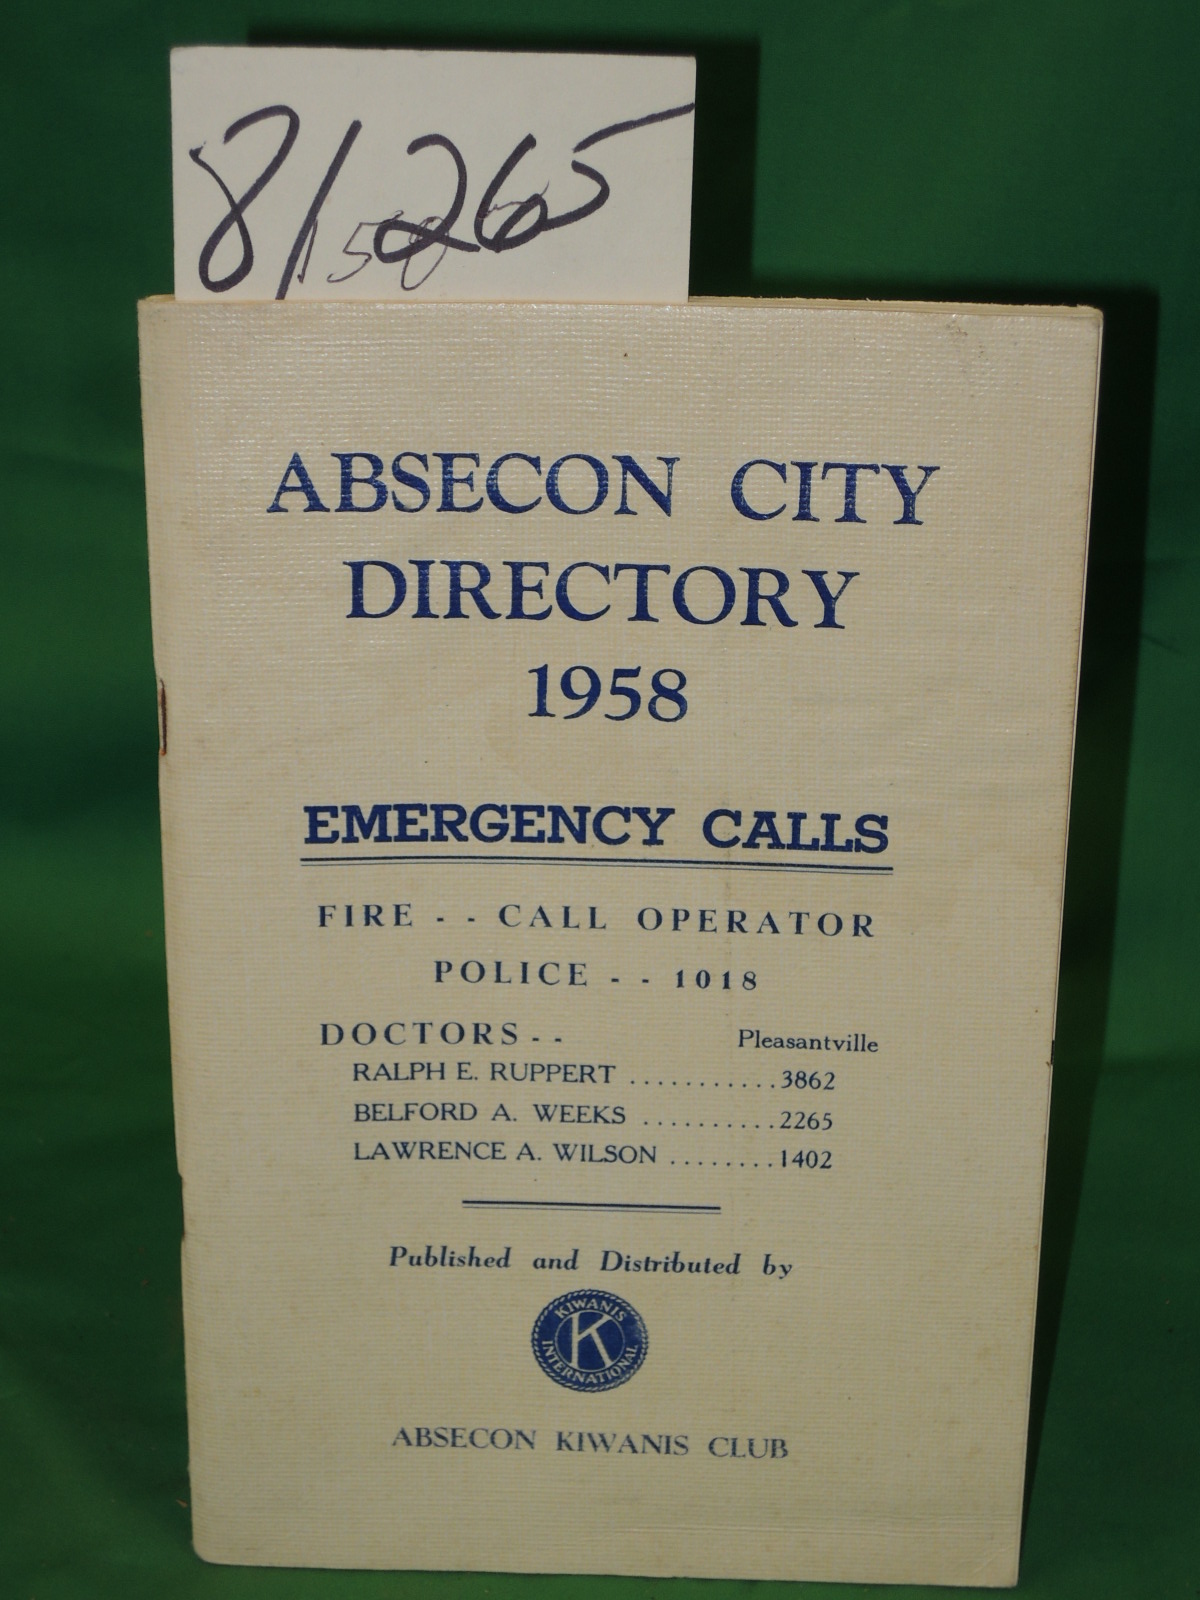 Absecon Kiwanis Club: Absecon City Directory 1958